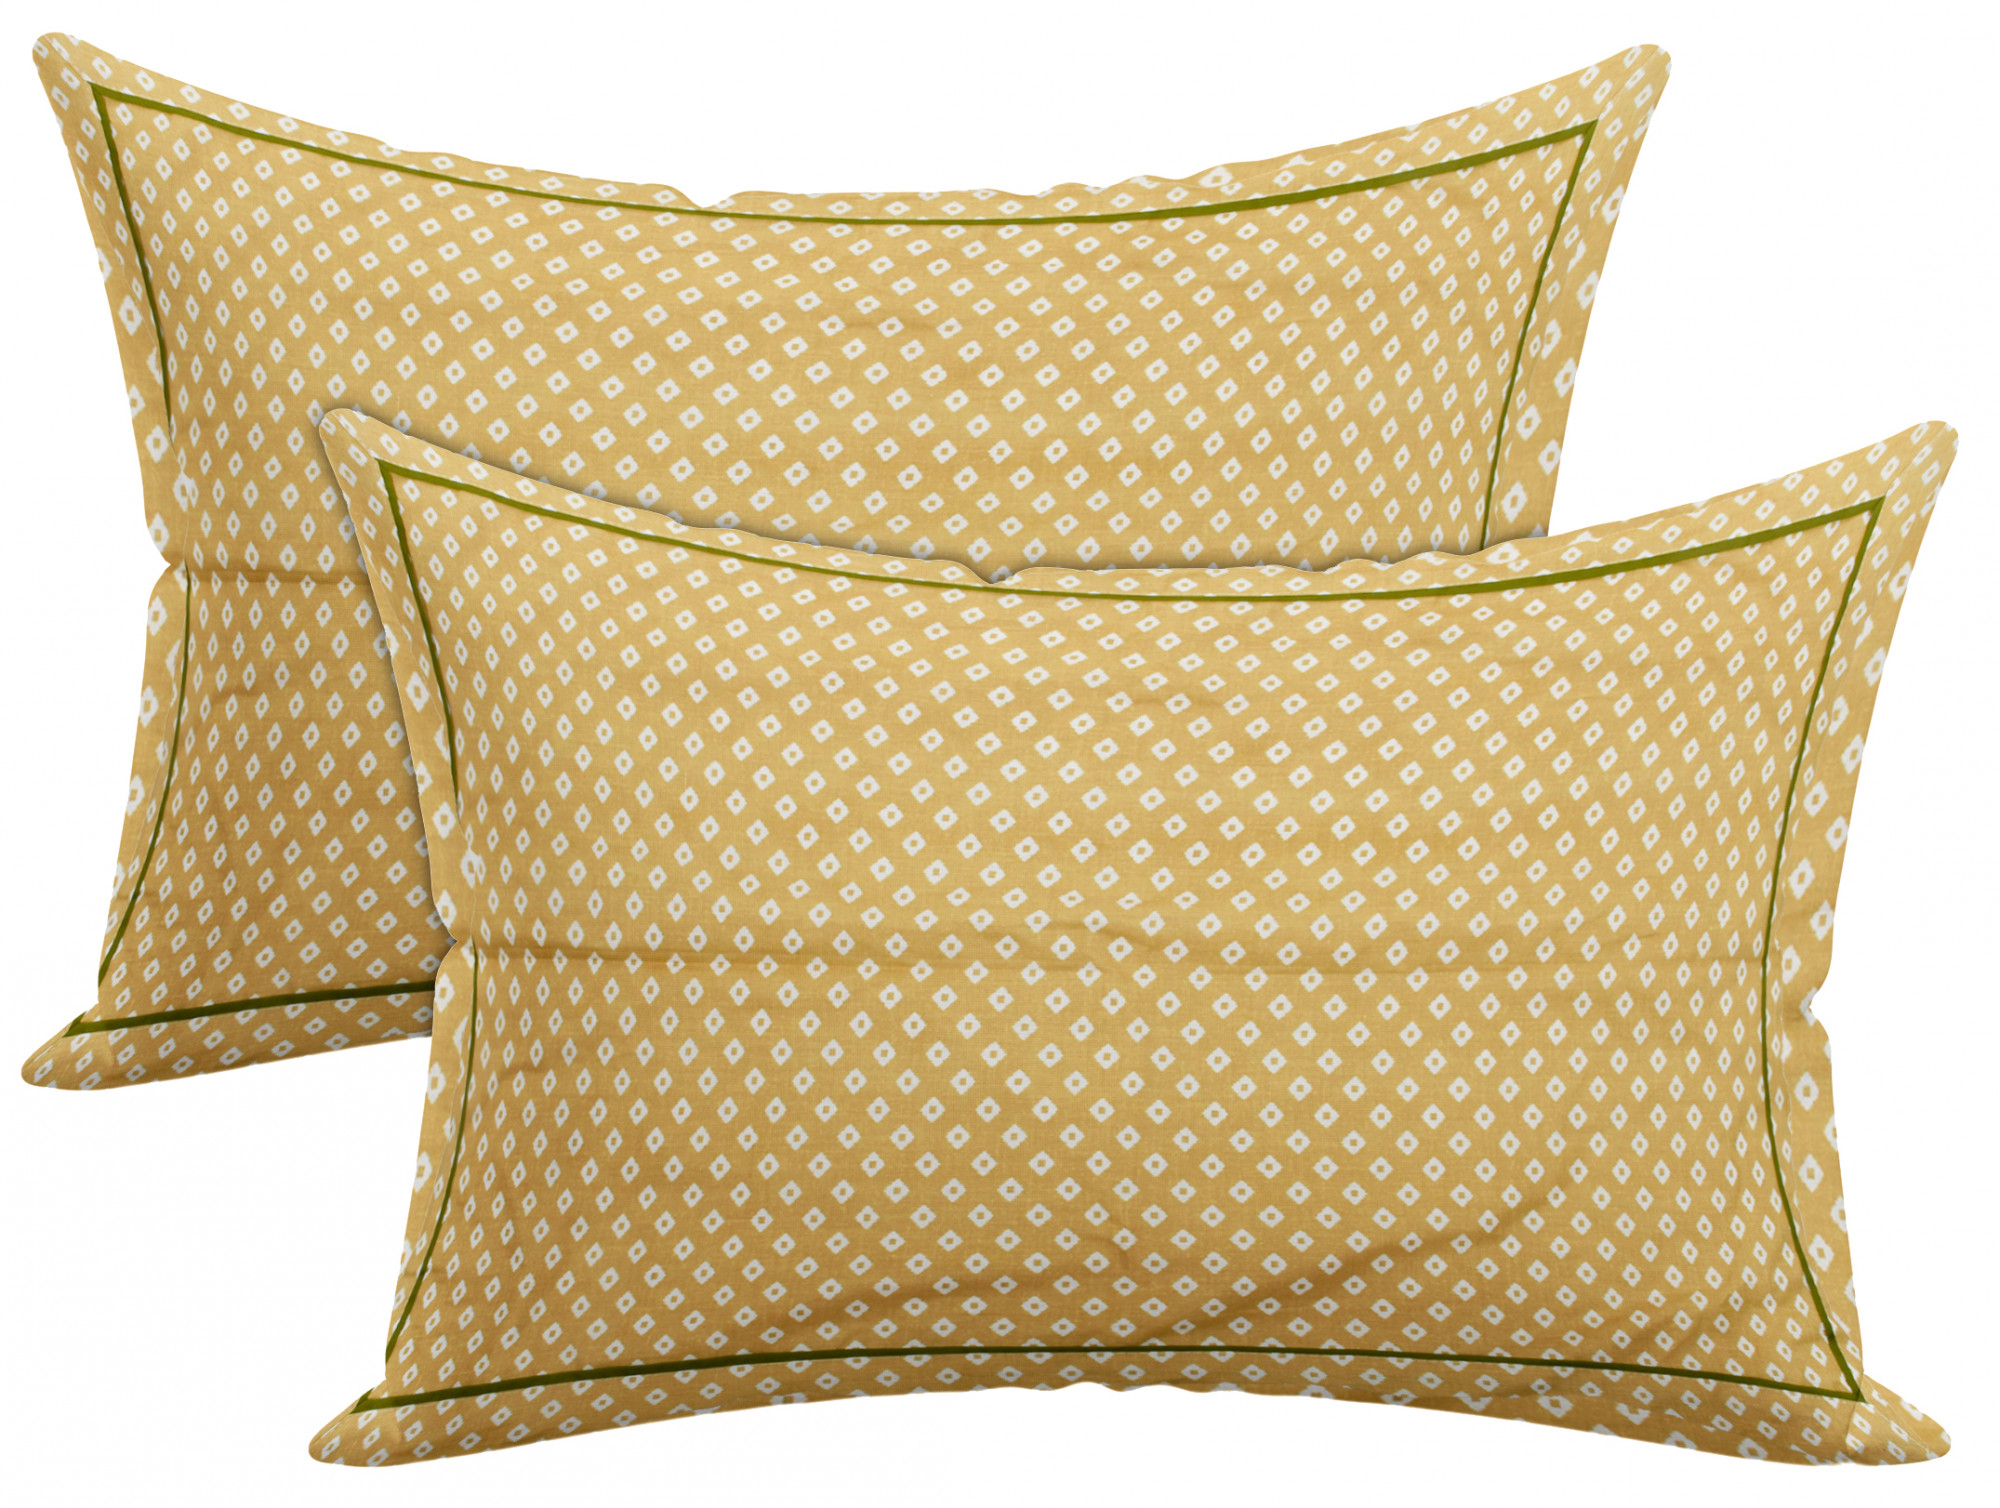 Kuber Industries Rhombus Design Cotton Pillow Covers, 18 x 28 inch,(Green)